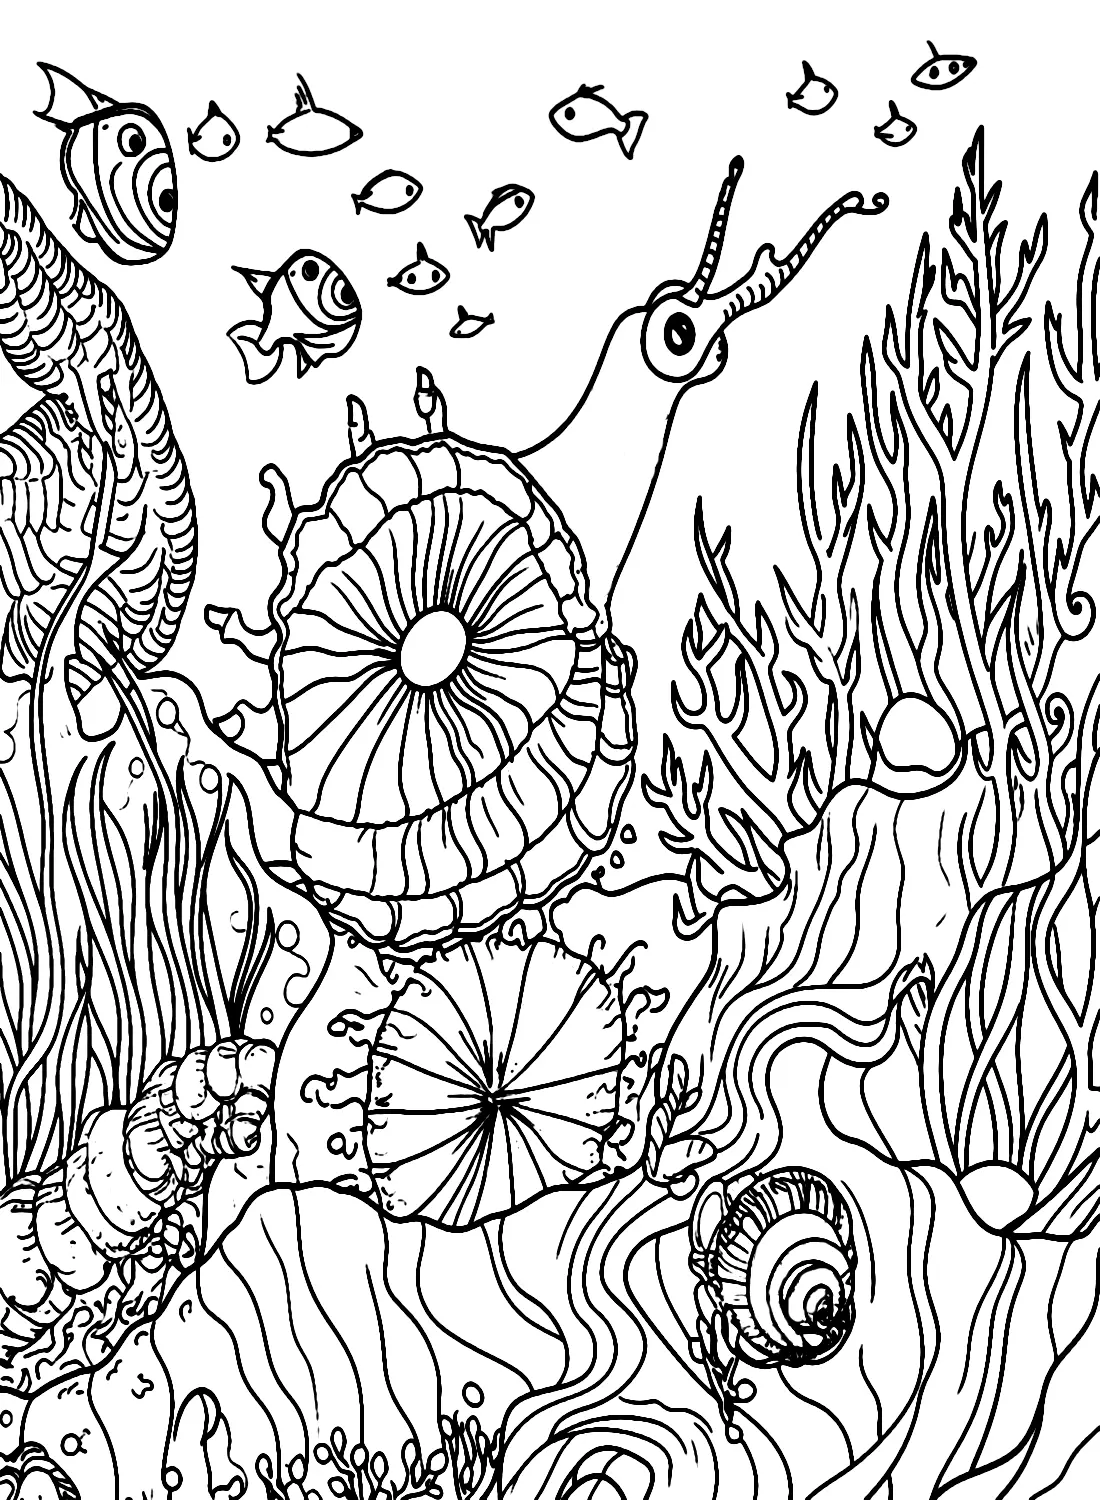 Sea Snail Coloring Pages